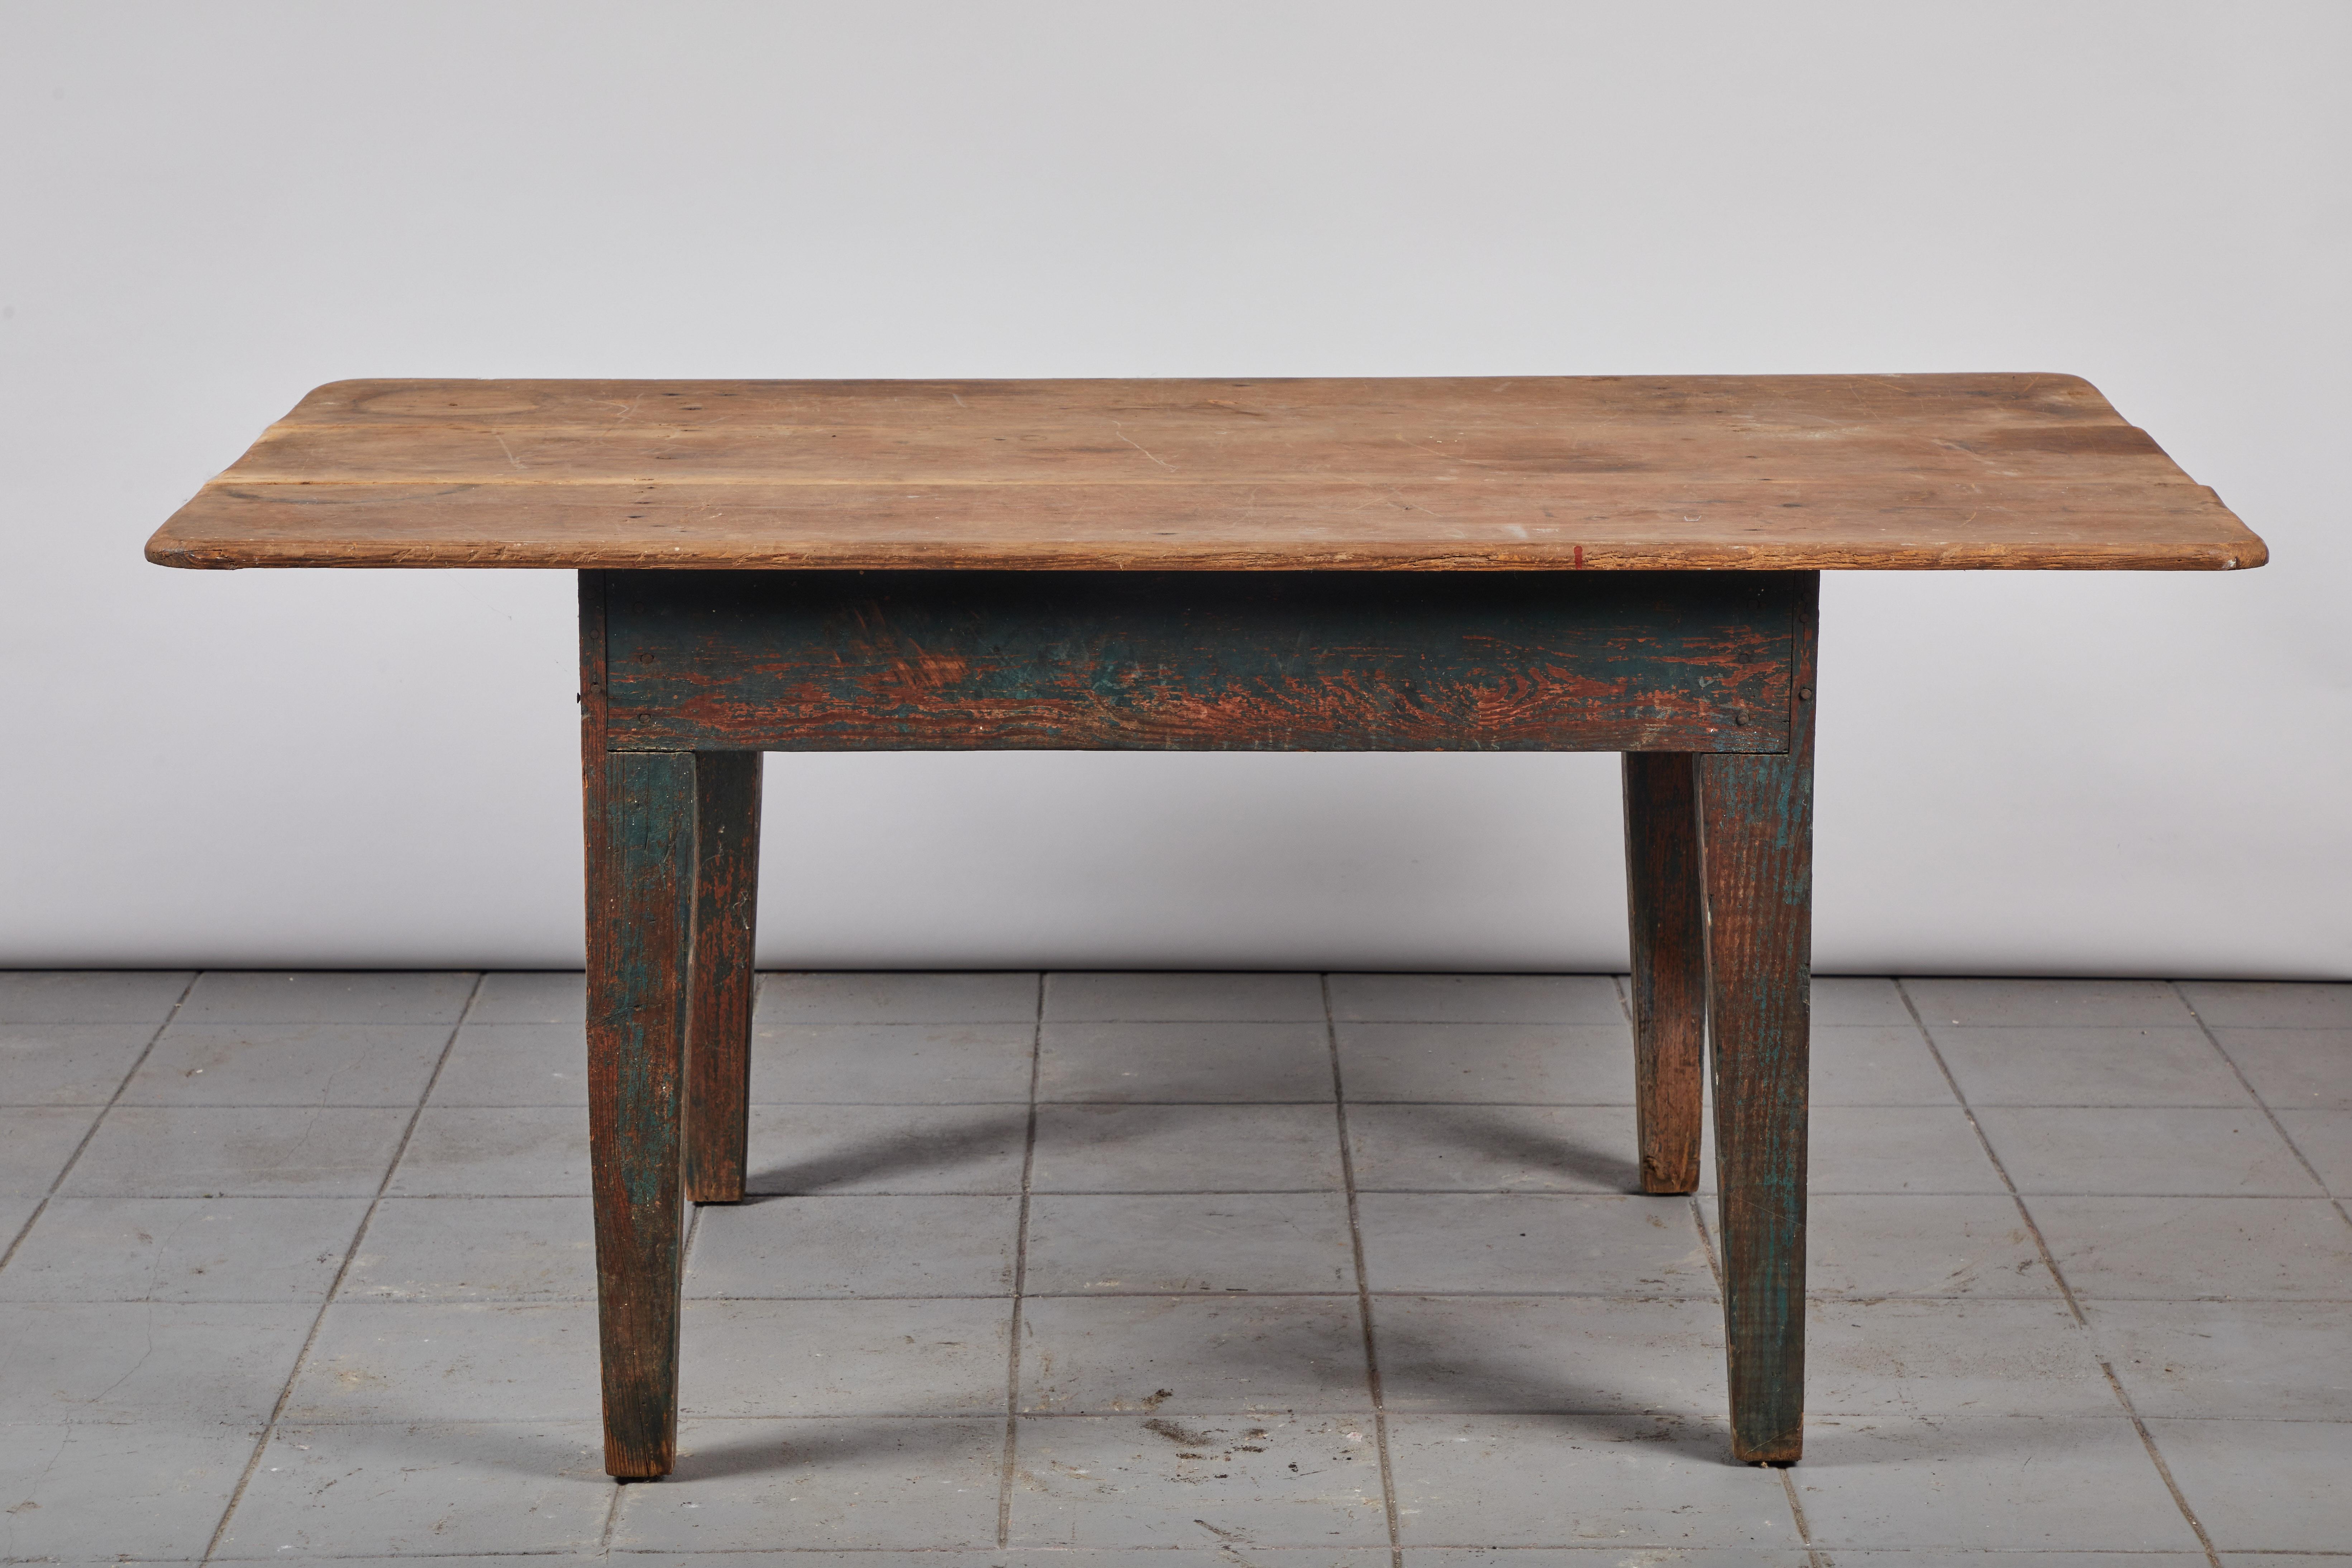 Rustic Early American work style dining table.